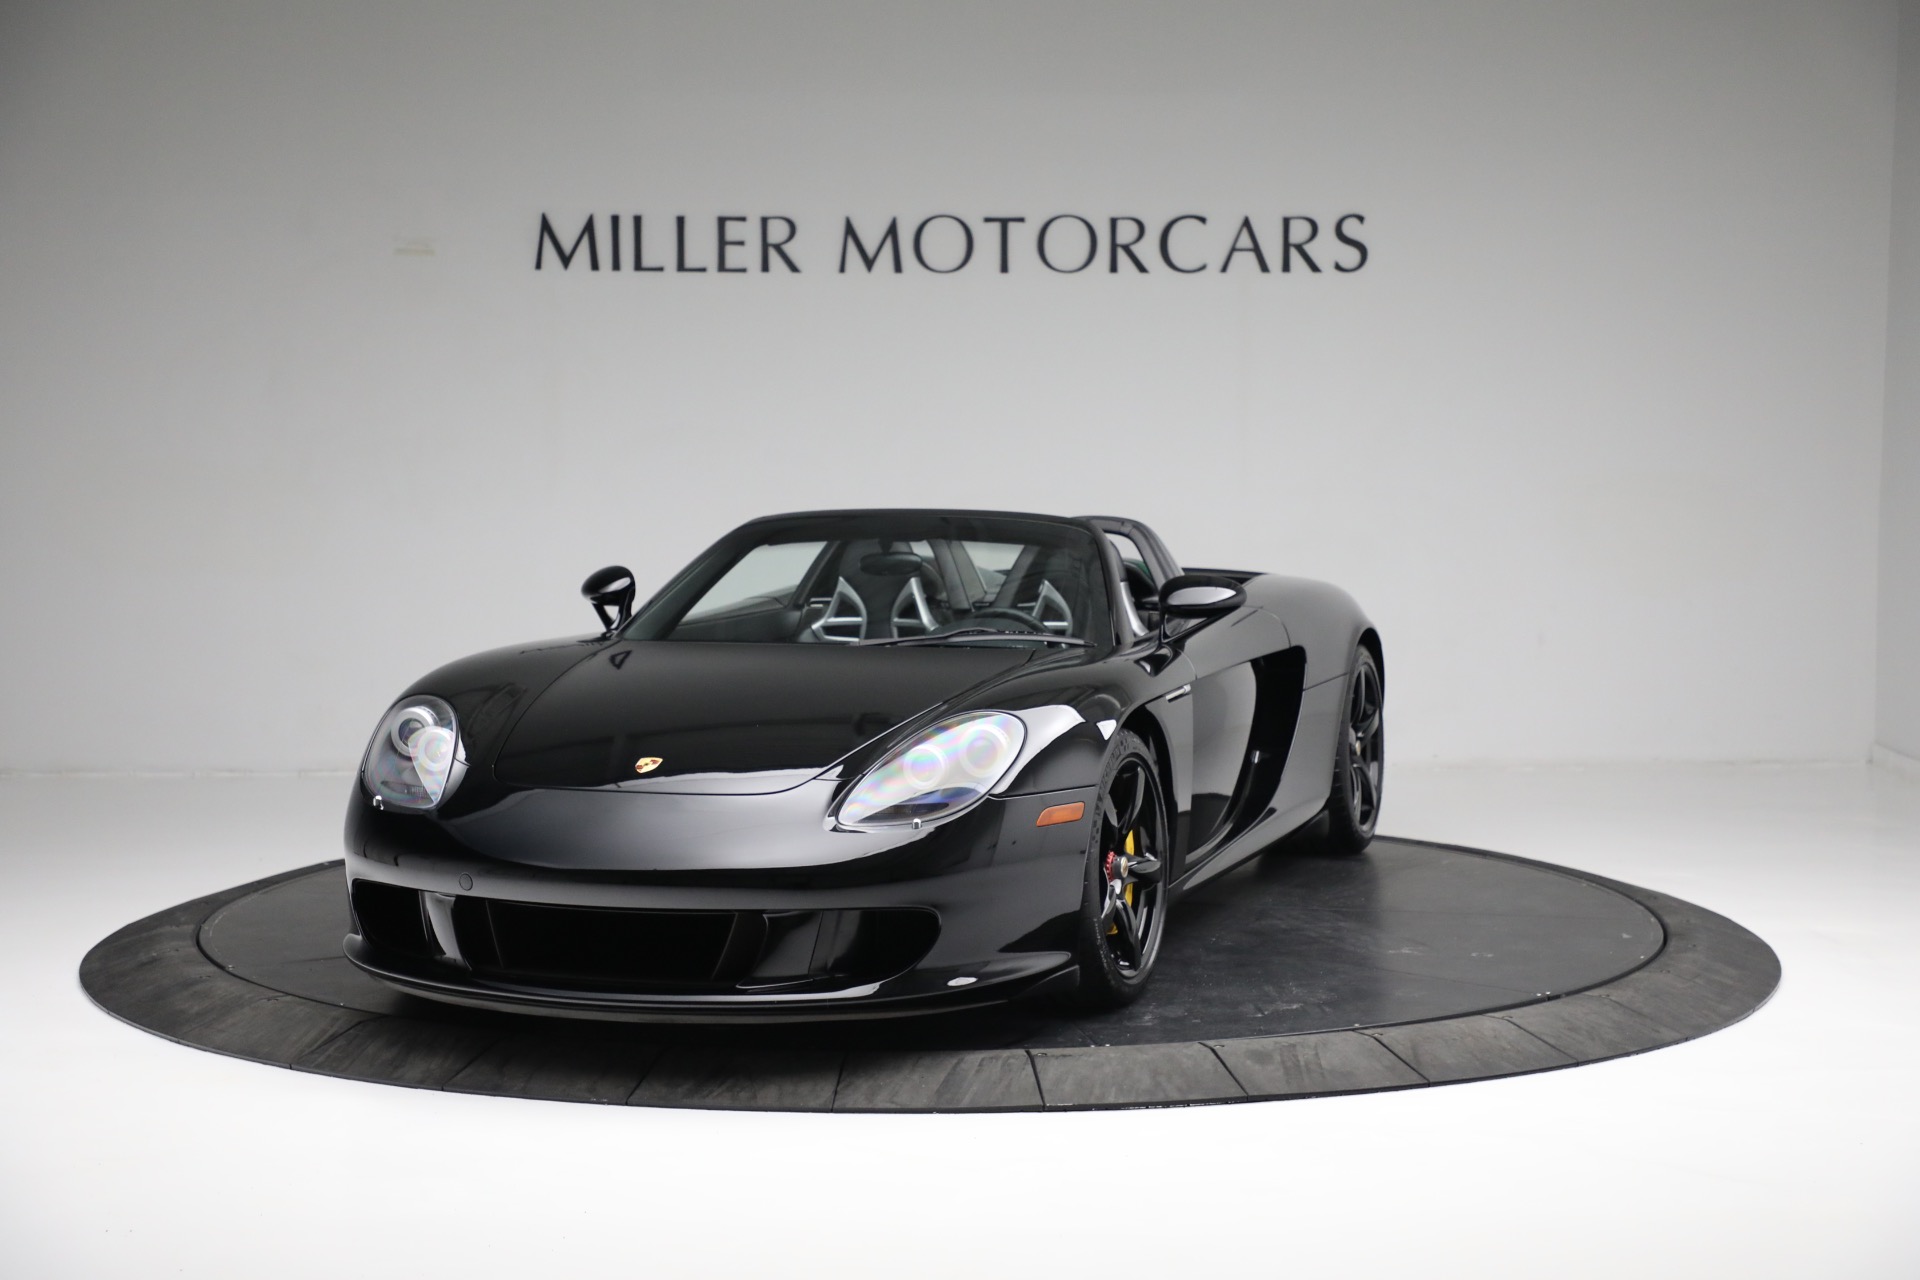 Used 2005 Porsche Carrera GT for sale $1,600,000 at Aston Martin of Greenwich in Greenwich CT 06830 1